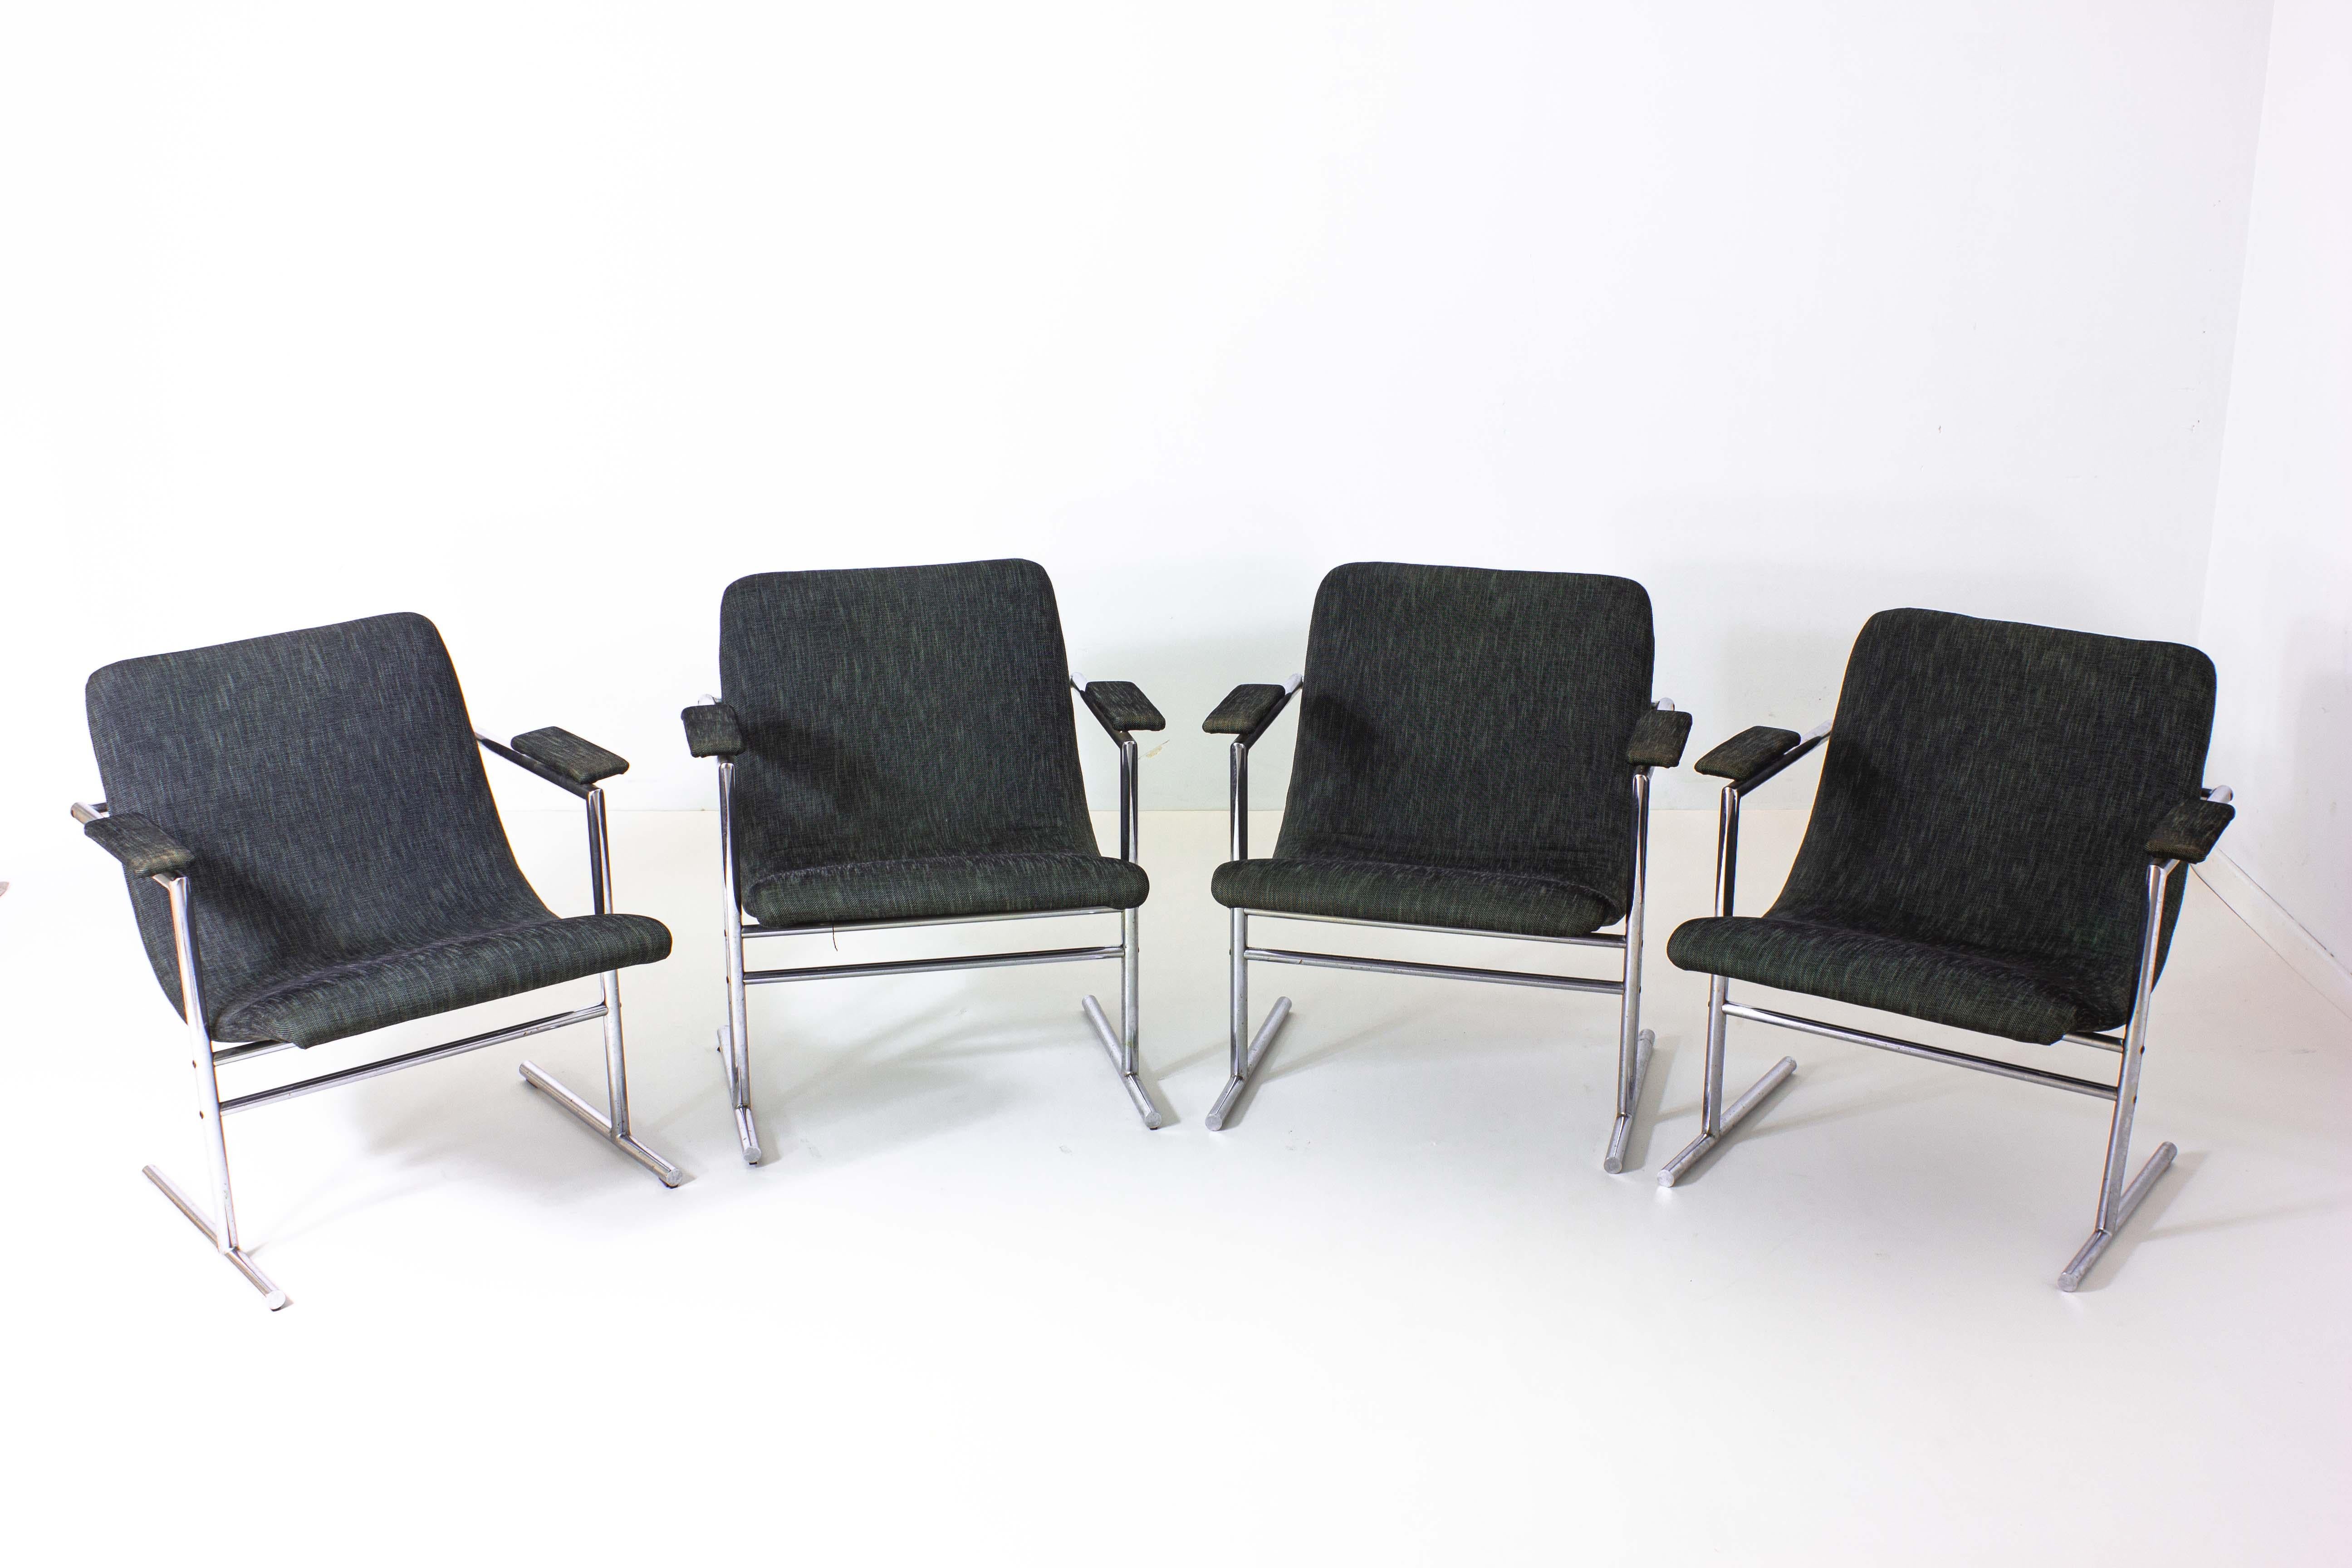 Four dark grey white “Oslo” chairs available by Rudi Verelst for Novalux, 1960s.
These minimal chairs in chromed tubular steel and fabric are designed in a beautiful wave structure that makes the seating appear like it’s floating.